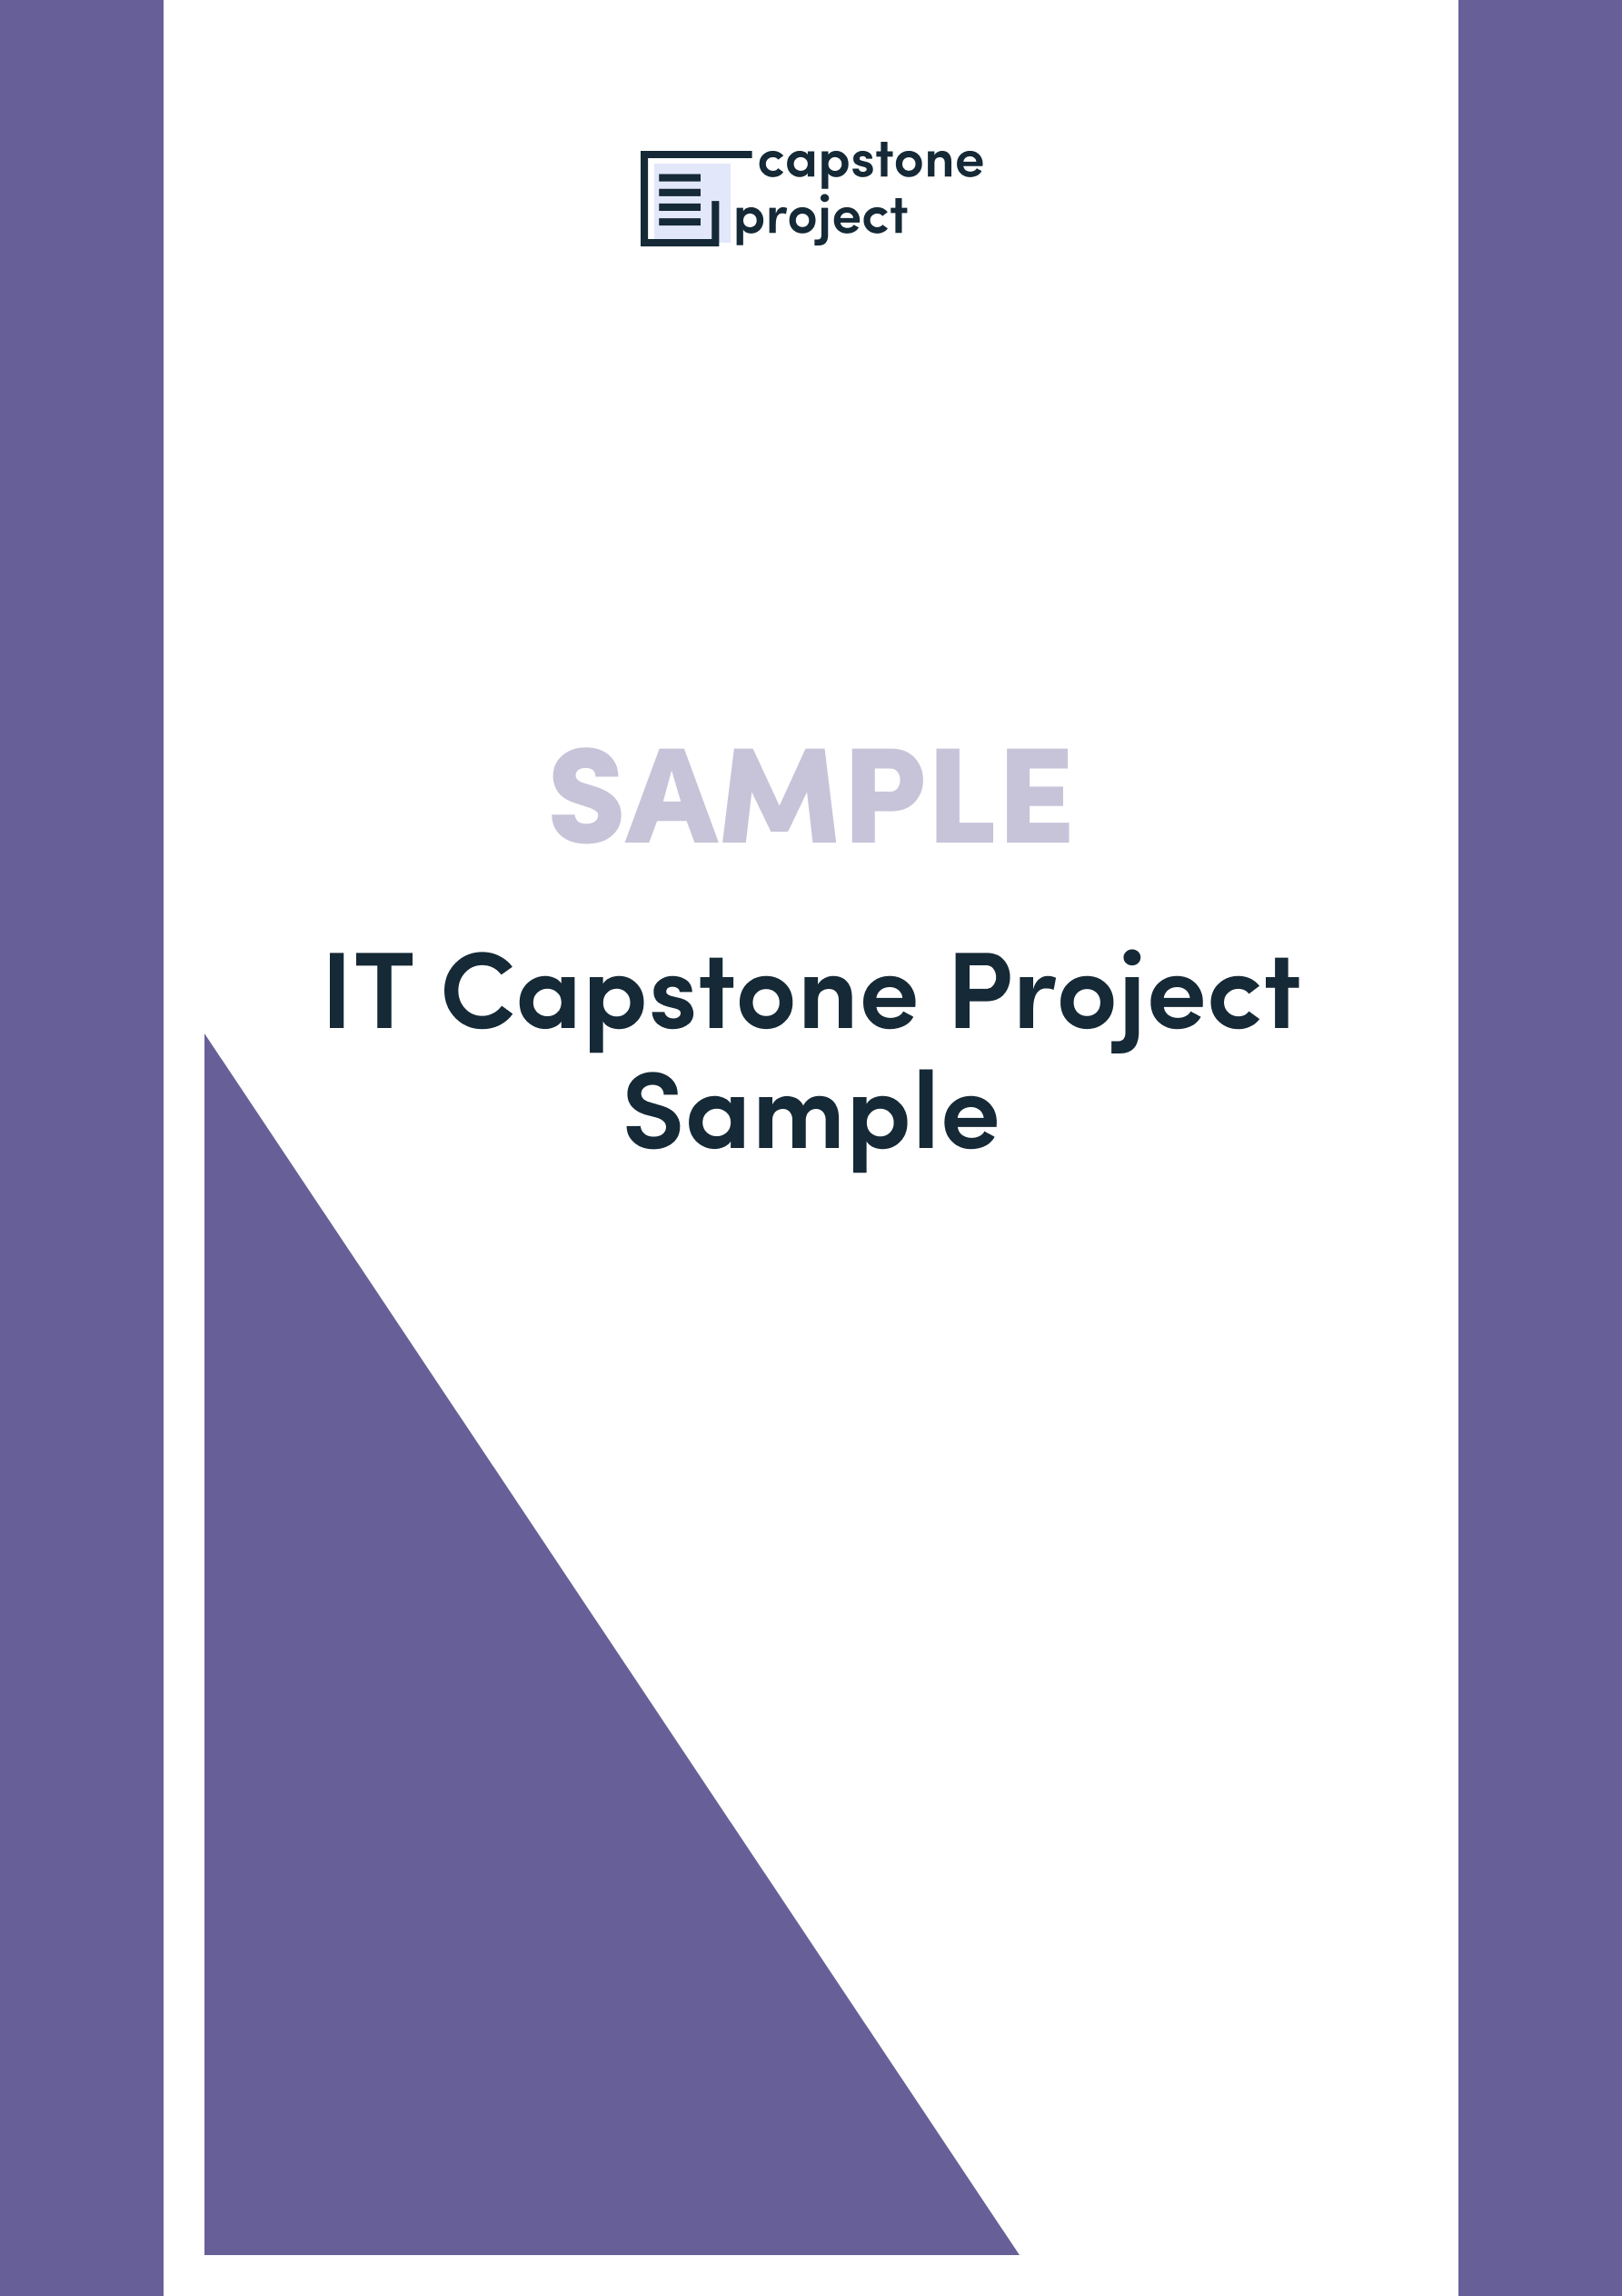 capstone project background of the study